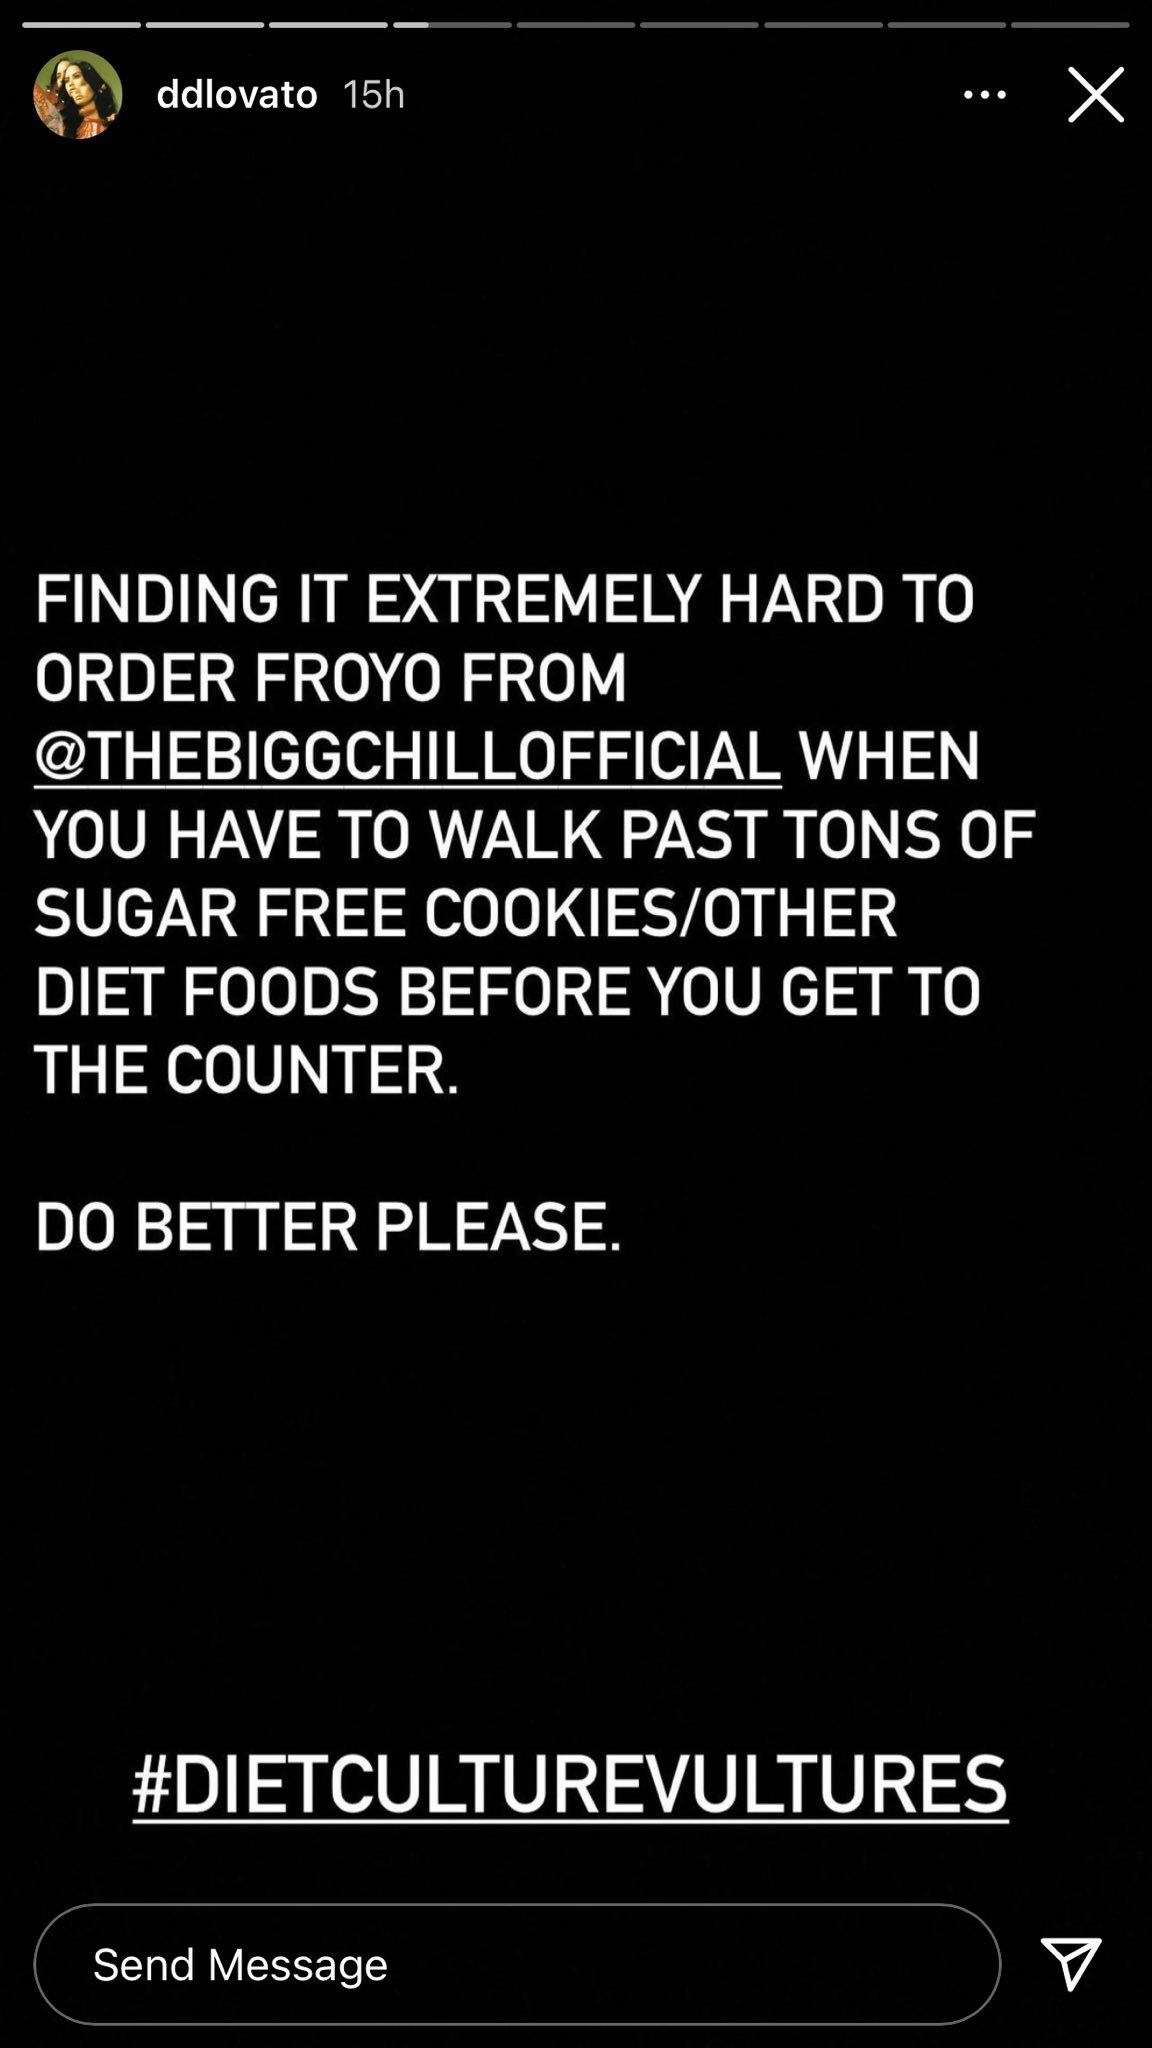 Demi's Instagram Story says, "Finding it extremely hard to order fro-yo from The Bigg Chill when you have to walk past tons of sugar-free cookies/other diet foods before you get to the counter; do better please"